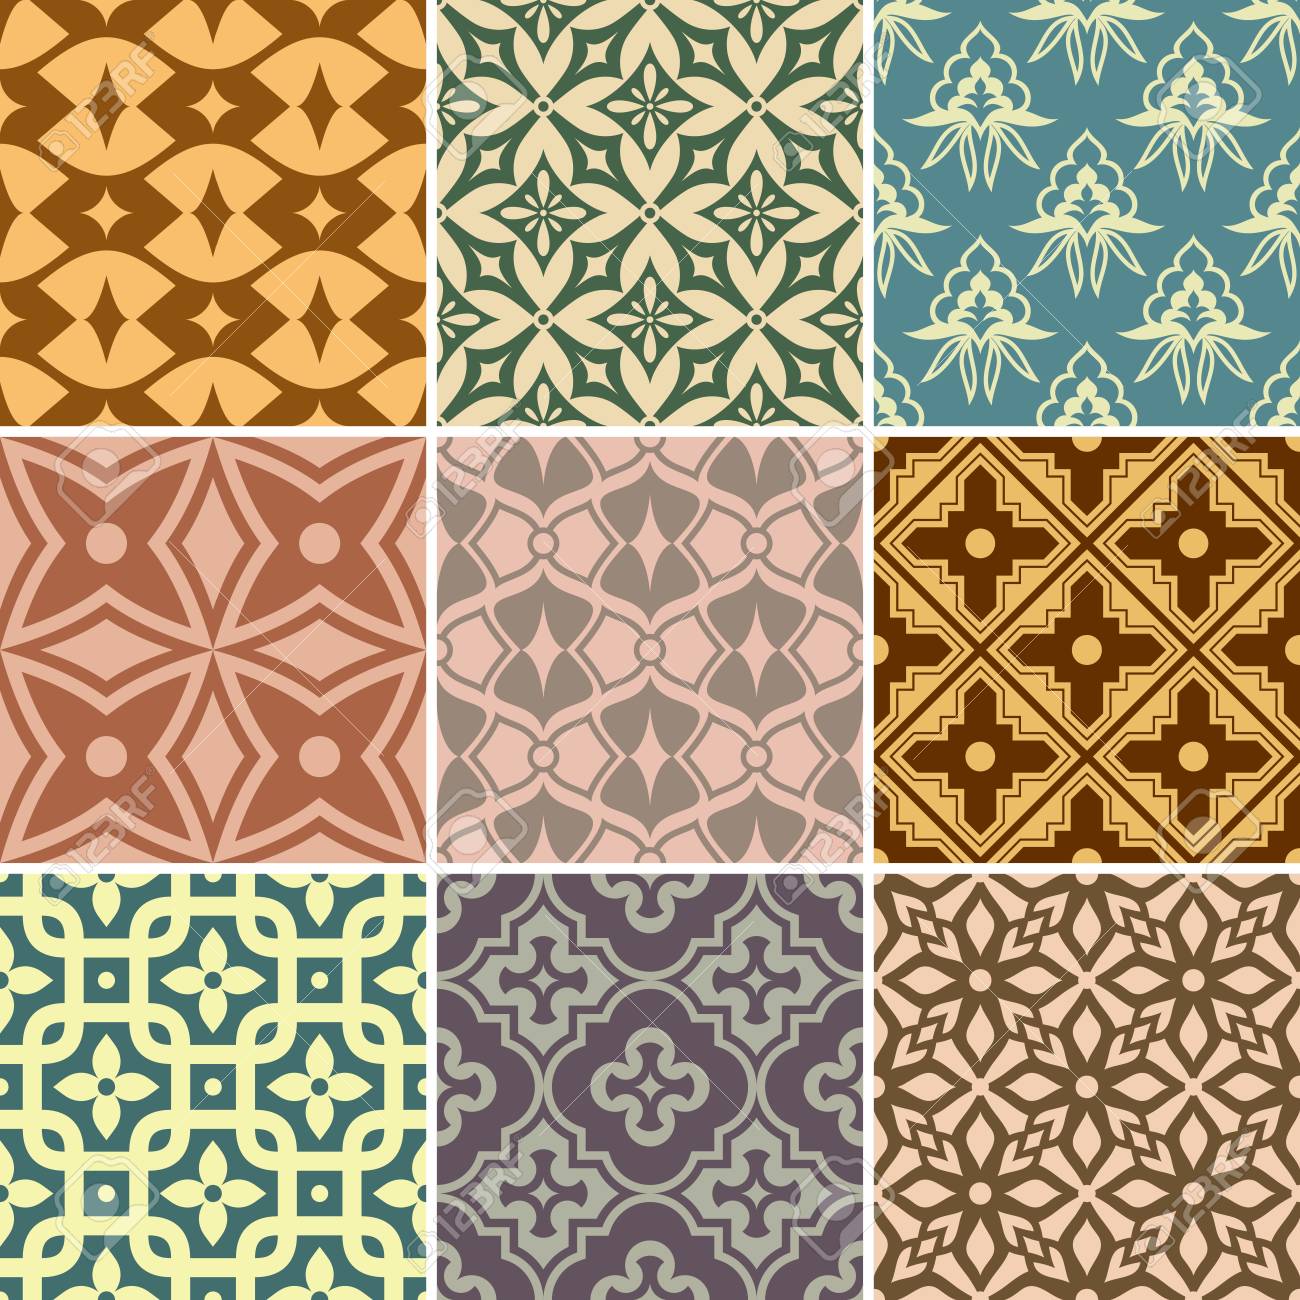 Retro Seamless Wallpaper Patterns Vintage Background With